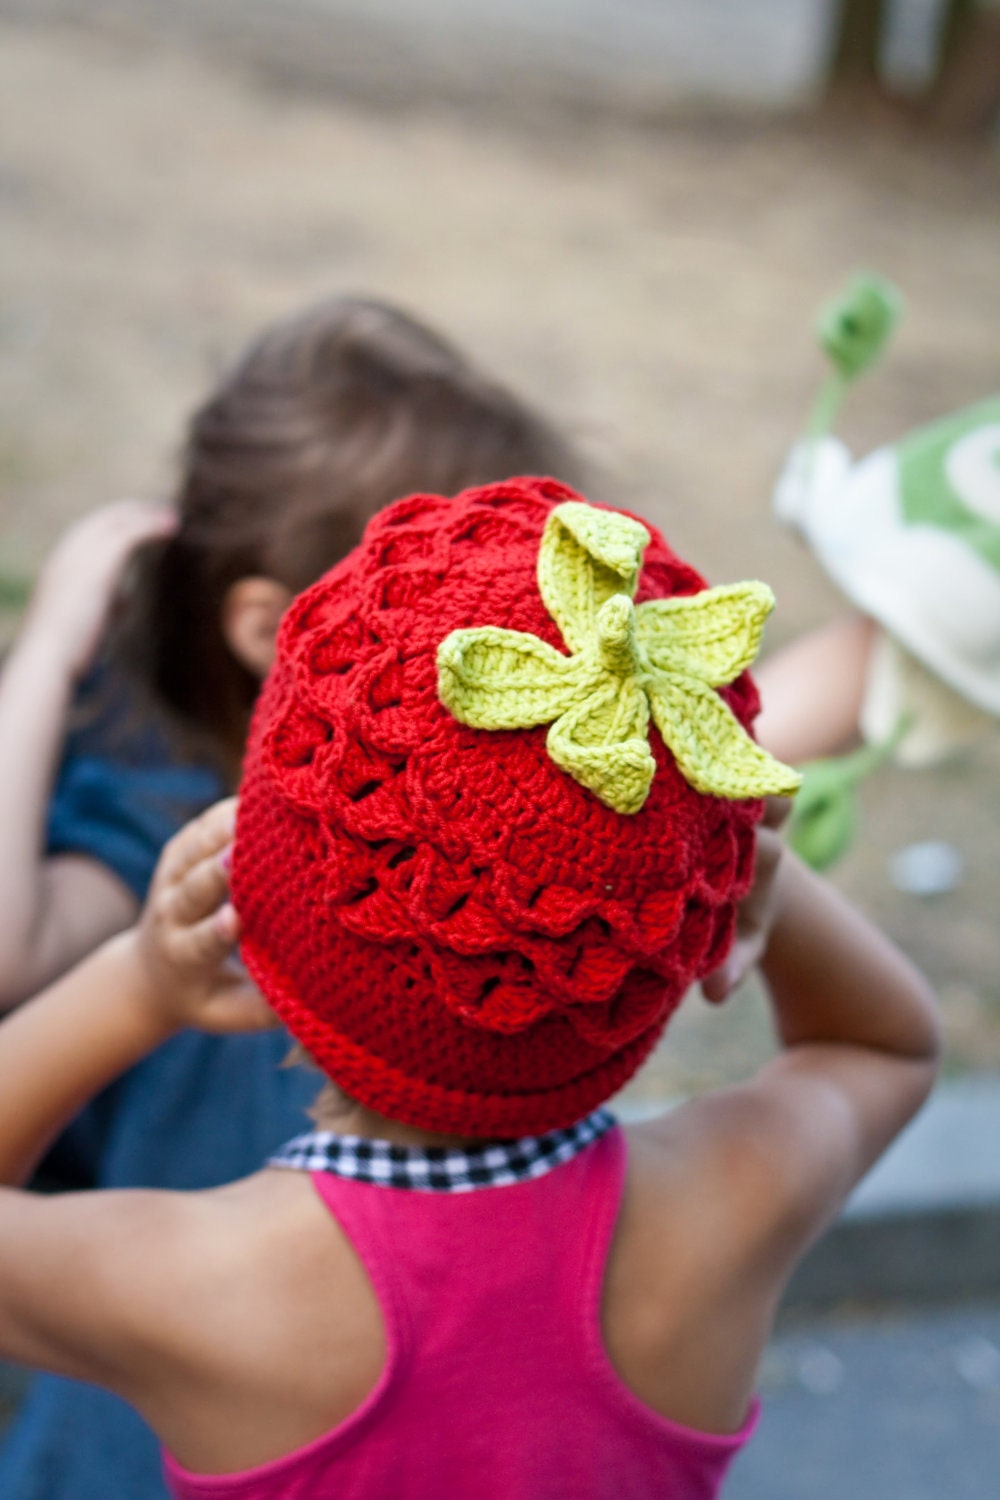 Funny Crochet Halloween Strawberry Hat Girlie Teen Woman Fall Autumn Accessories in Red Green designed by dodofit on Etsy